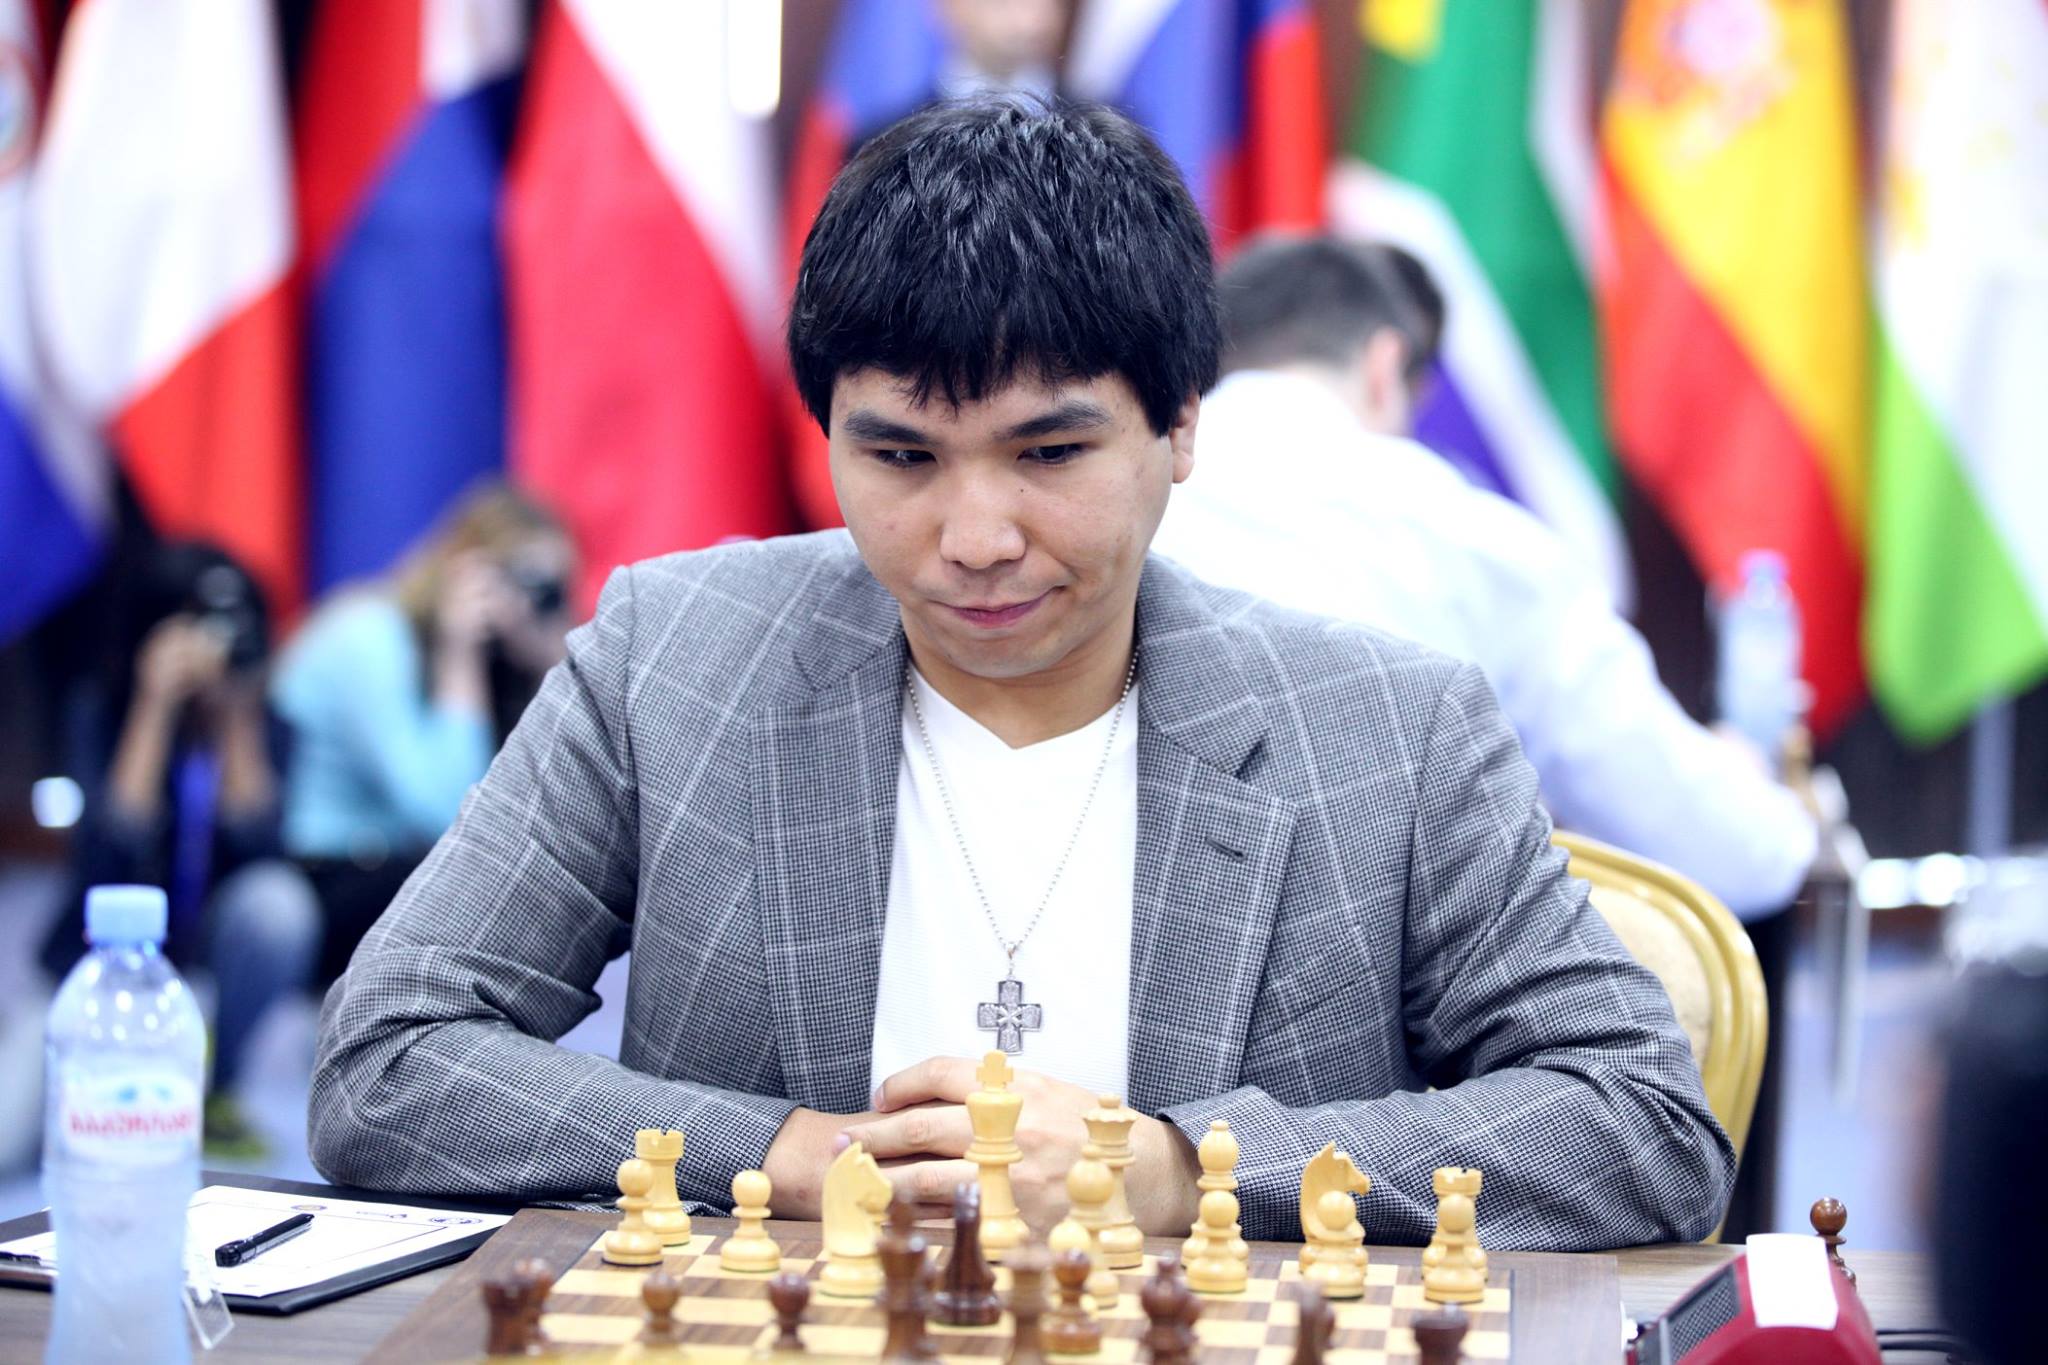 Wesley So's Favorite Chess Game// 38th Chess Olympiad, Dresden